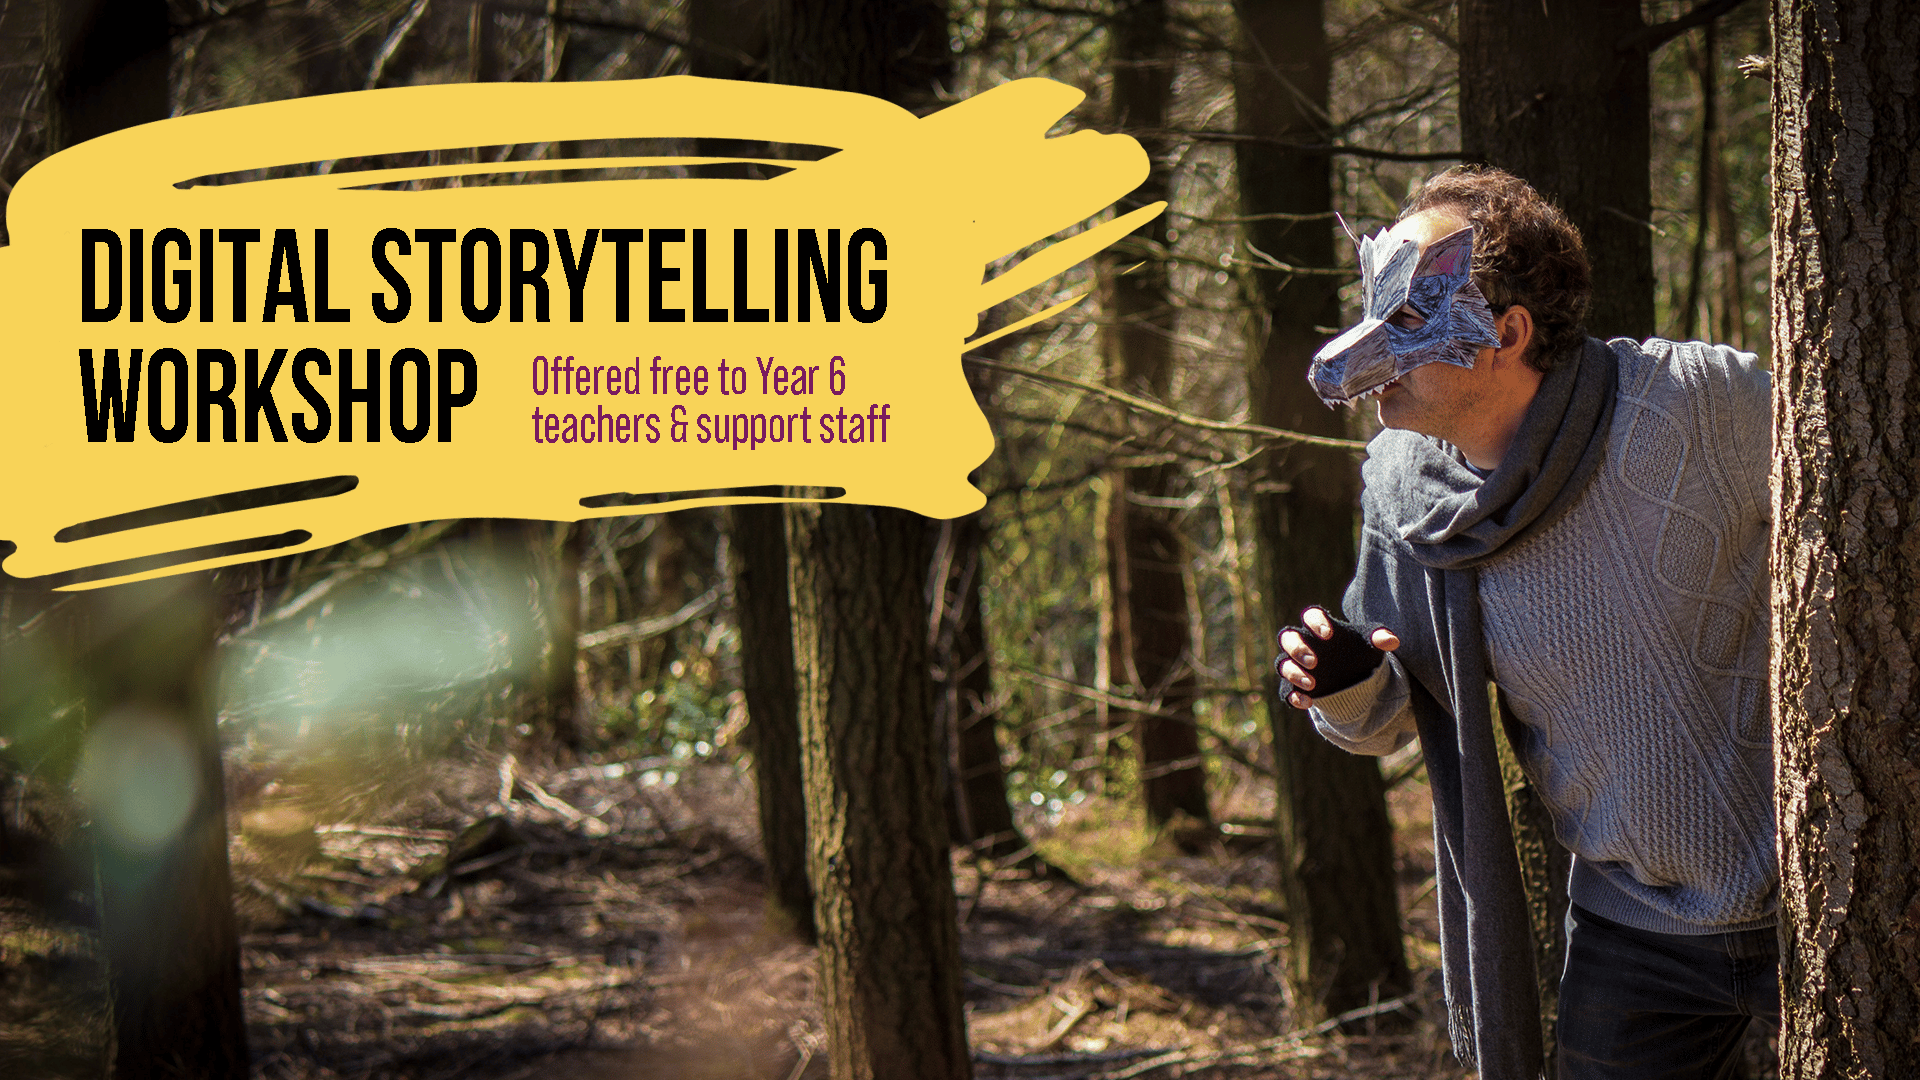 Digital StoryTelling Workshop Offered free to Year 6 teachers and support staff